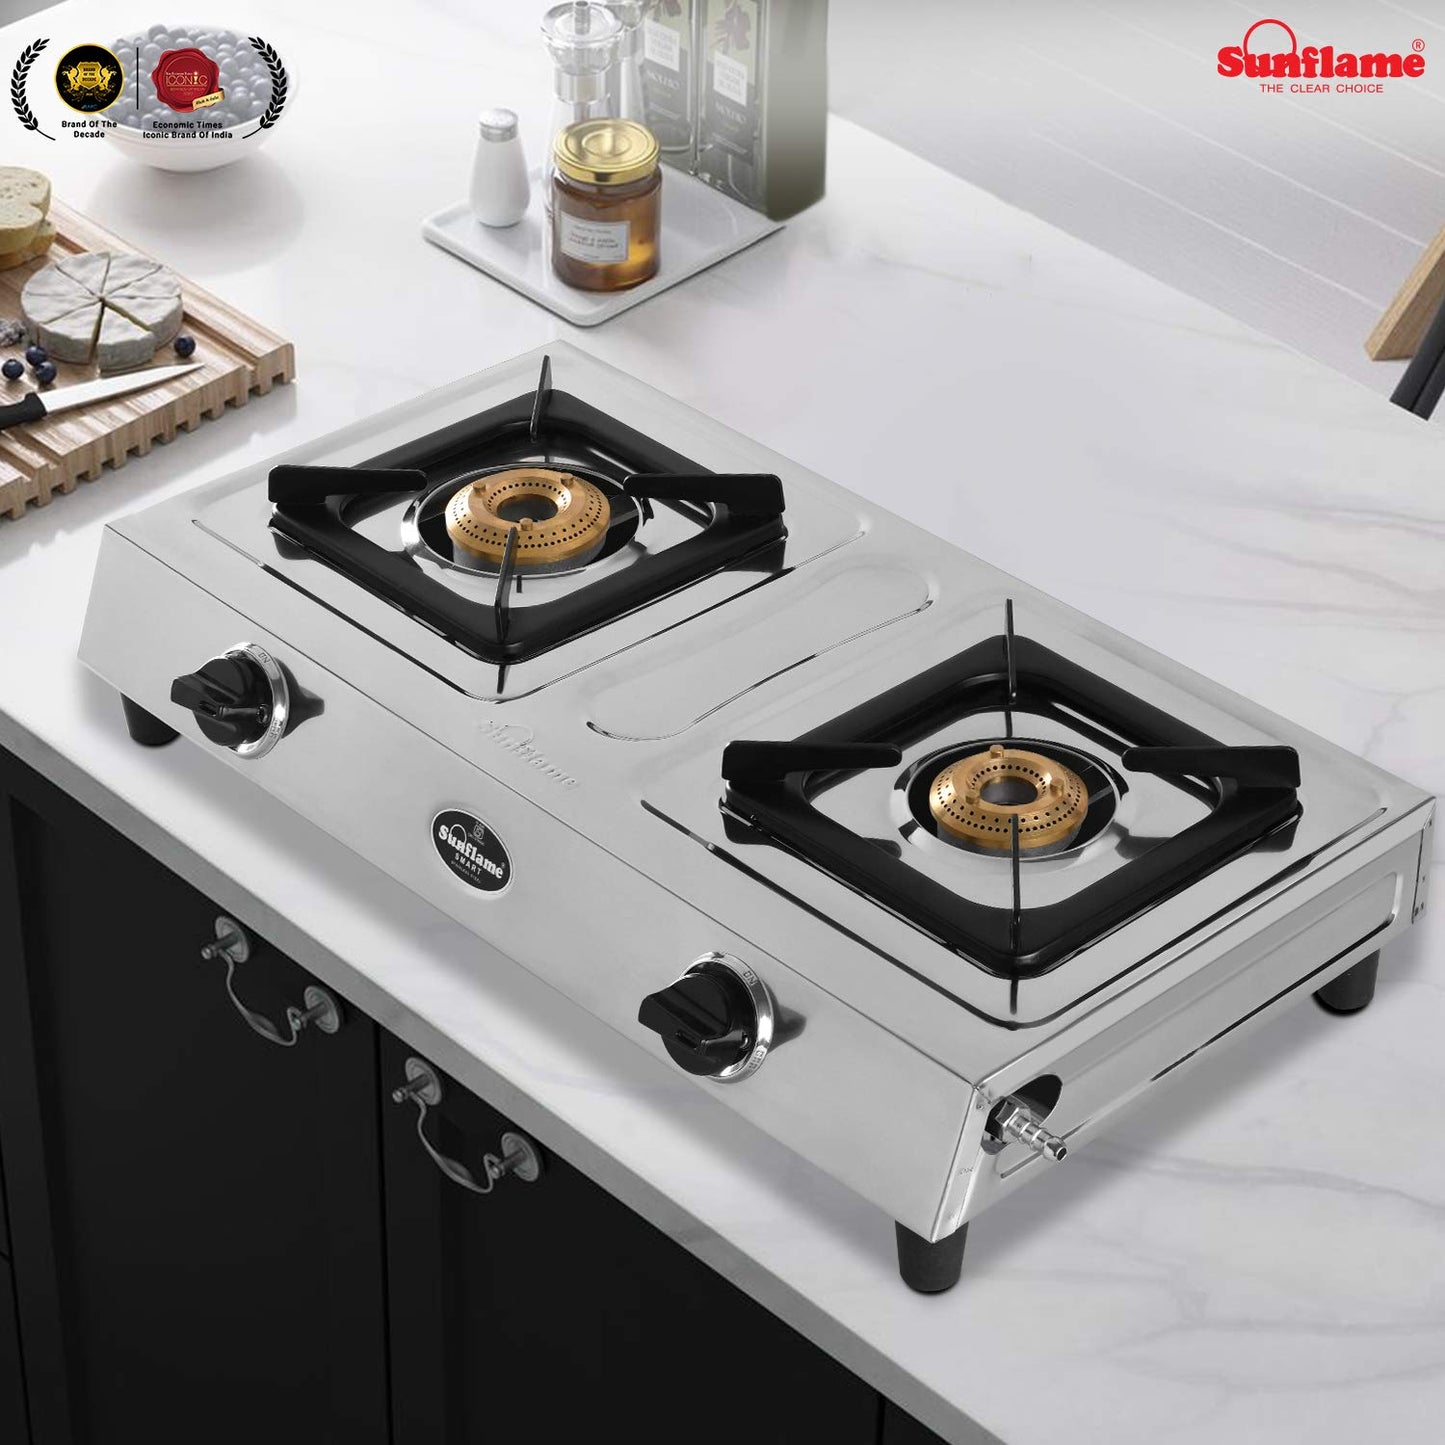 Sunflame 2B - Stainless Steel 2 Burner Gas Stove (Manual Ignition, 2 Brass Burners, Silver)